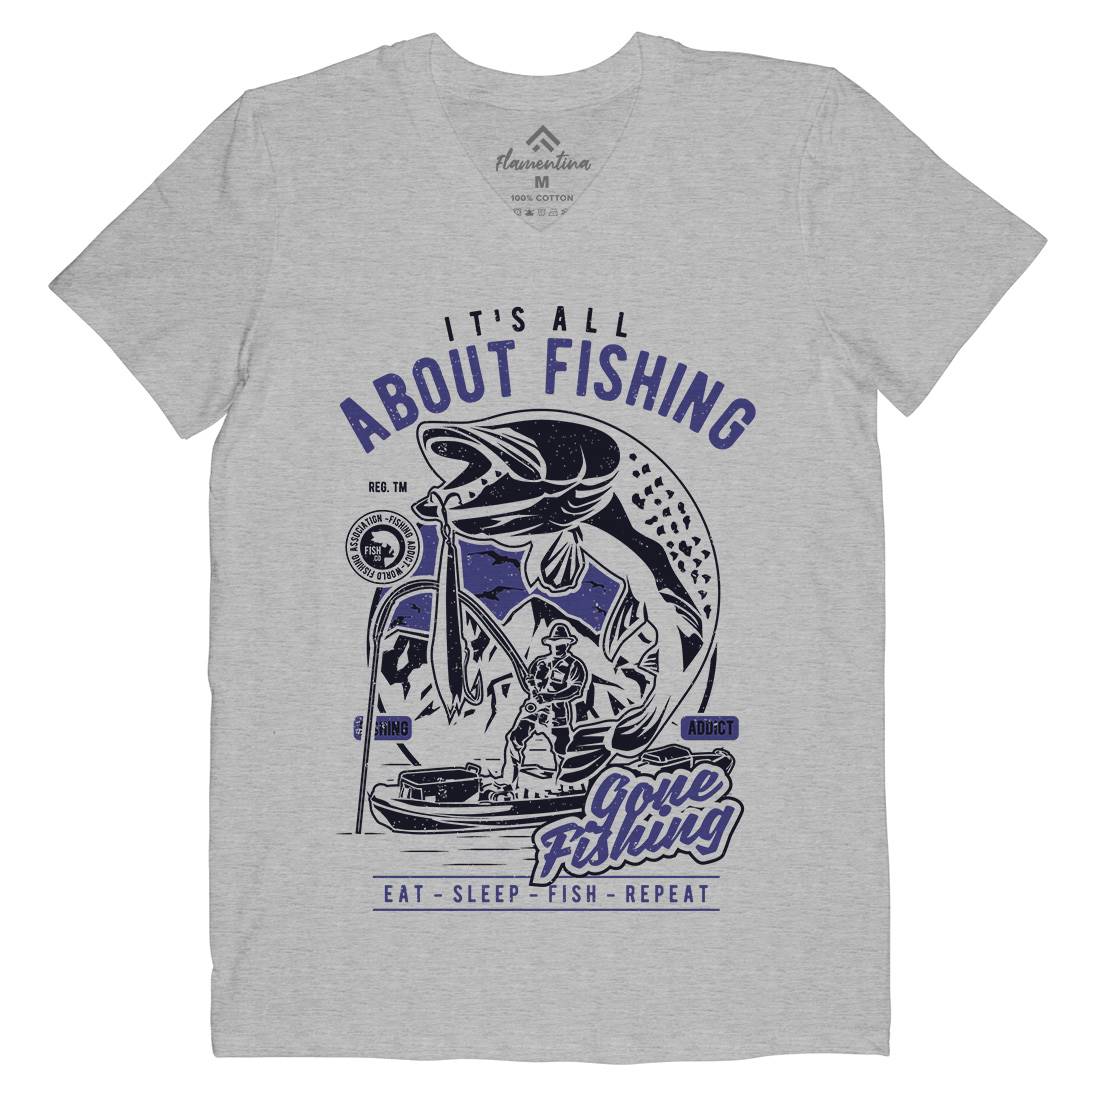 All About Mens V-Neck T-Shirt Fishing A604